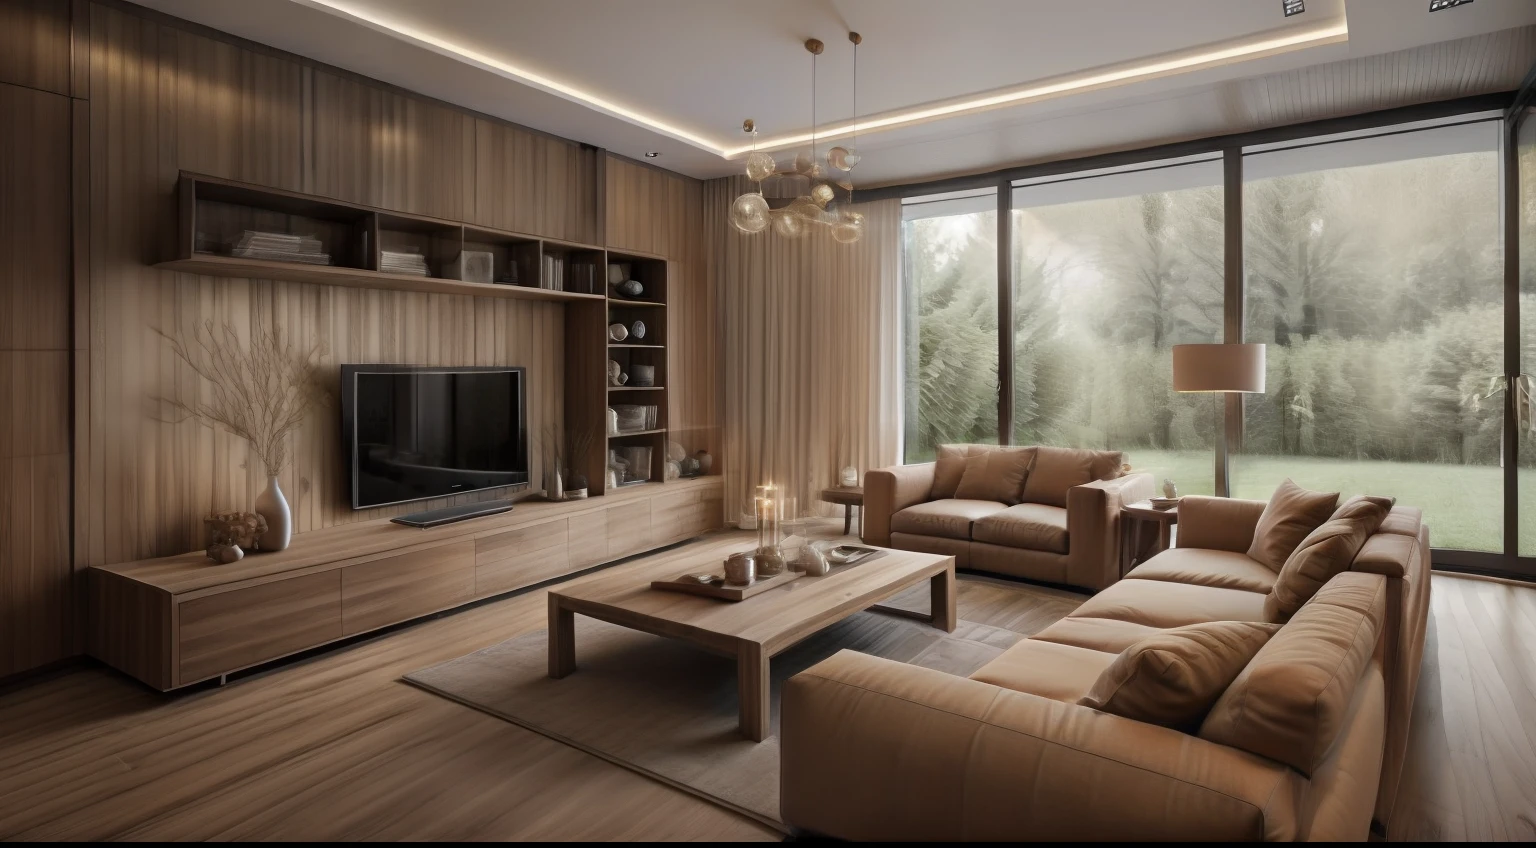 (( masterpiece)) (( ultral realistic)) (( sharp forcus)) (( high detail)) livingroom in minimalist style , wallpaper decor, wooden floor, glass window , fabric sofa,